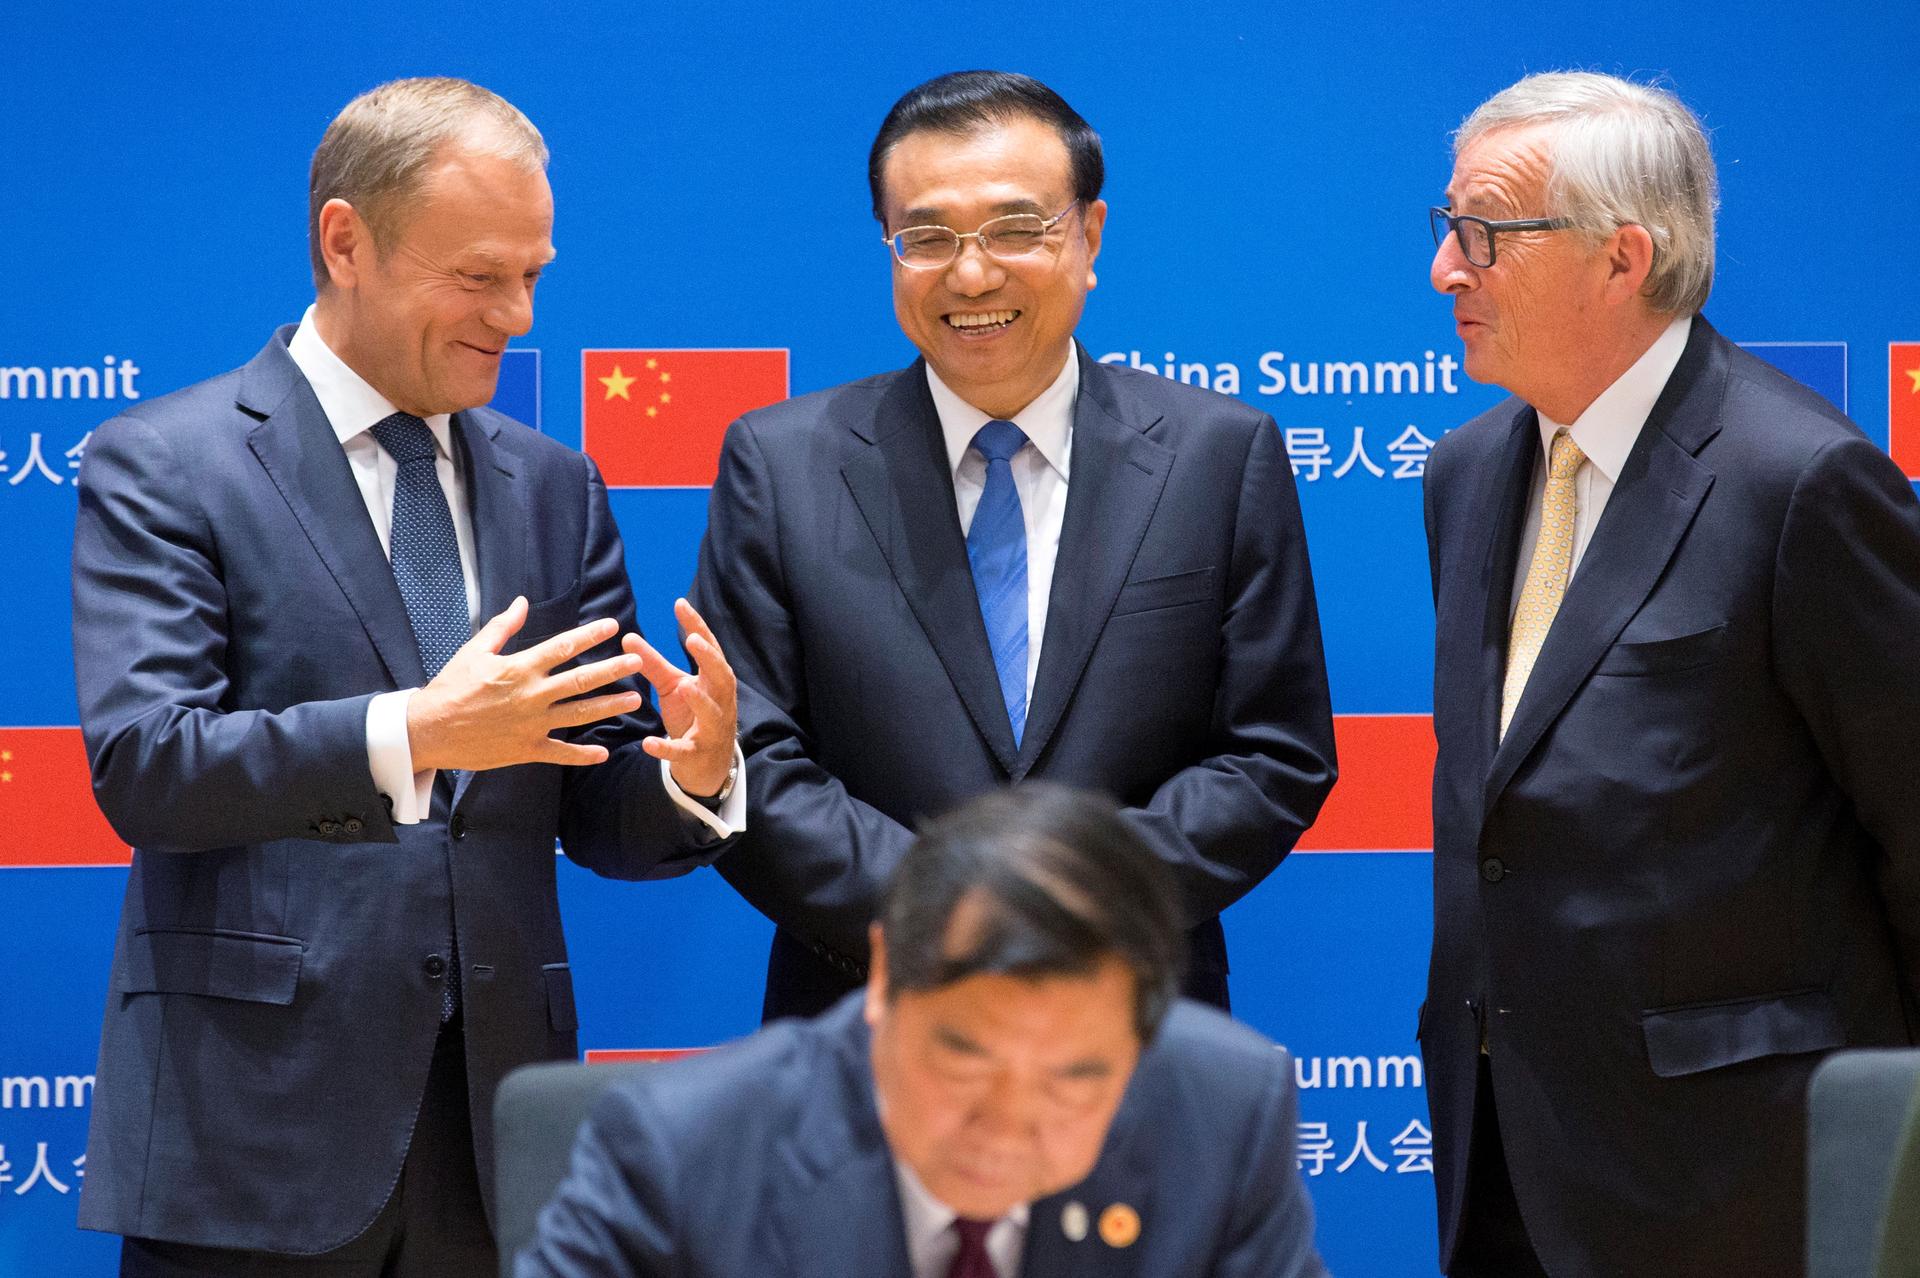 European Council President Donald Tusk, Chinese Premier Li Keqiang and EU Commission President Jean-Claude Juncker attend a signing ceremony during a EU-China Summit in Brussels, Belgium June 2, 2017.